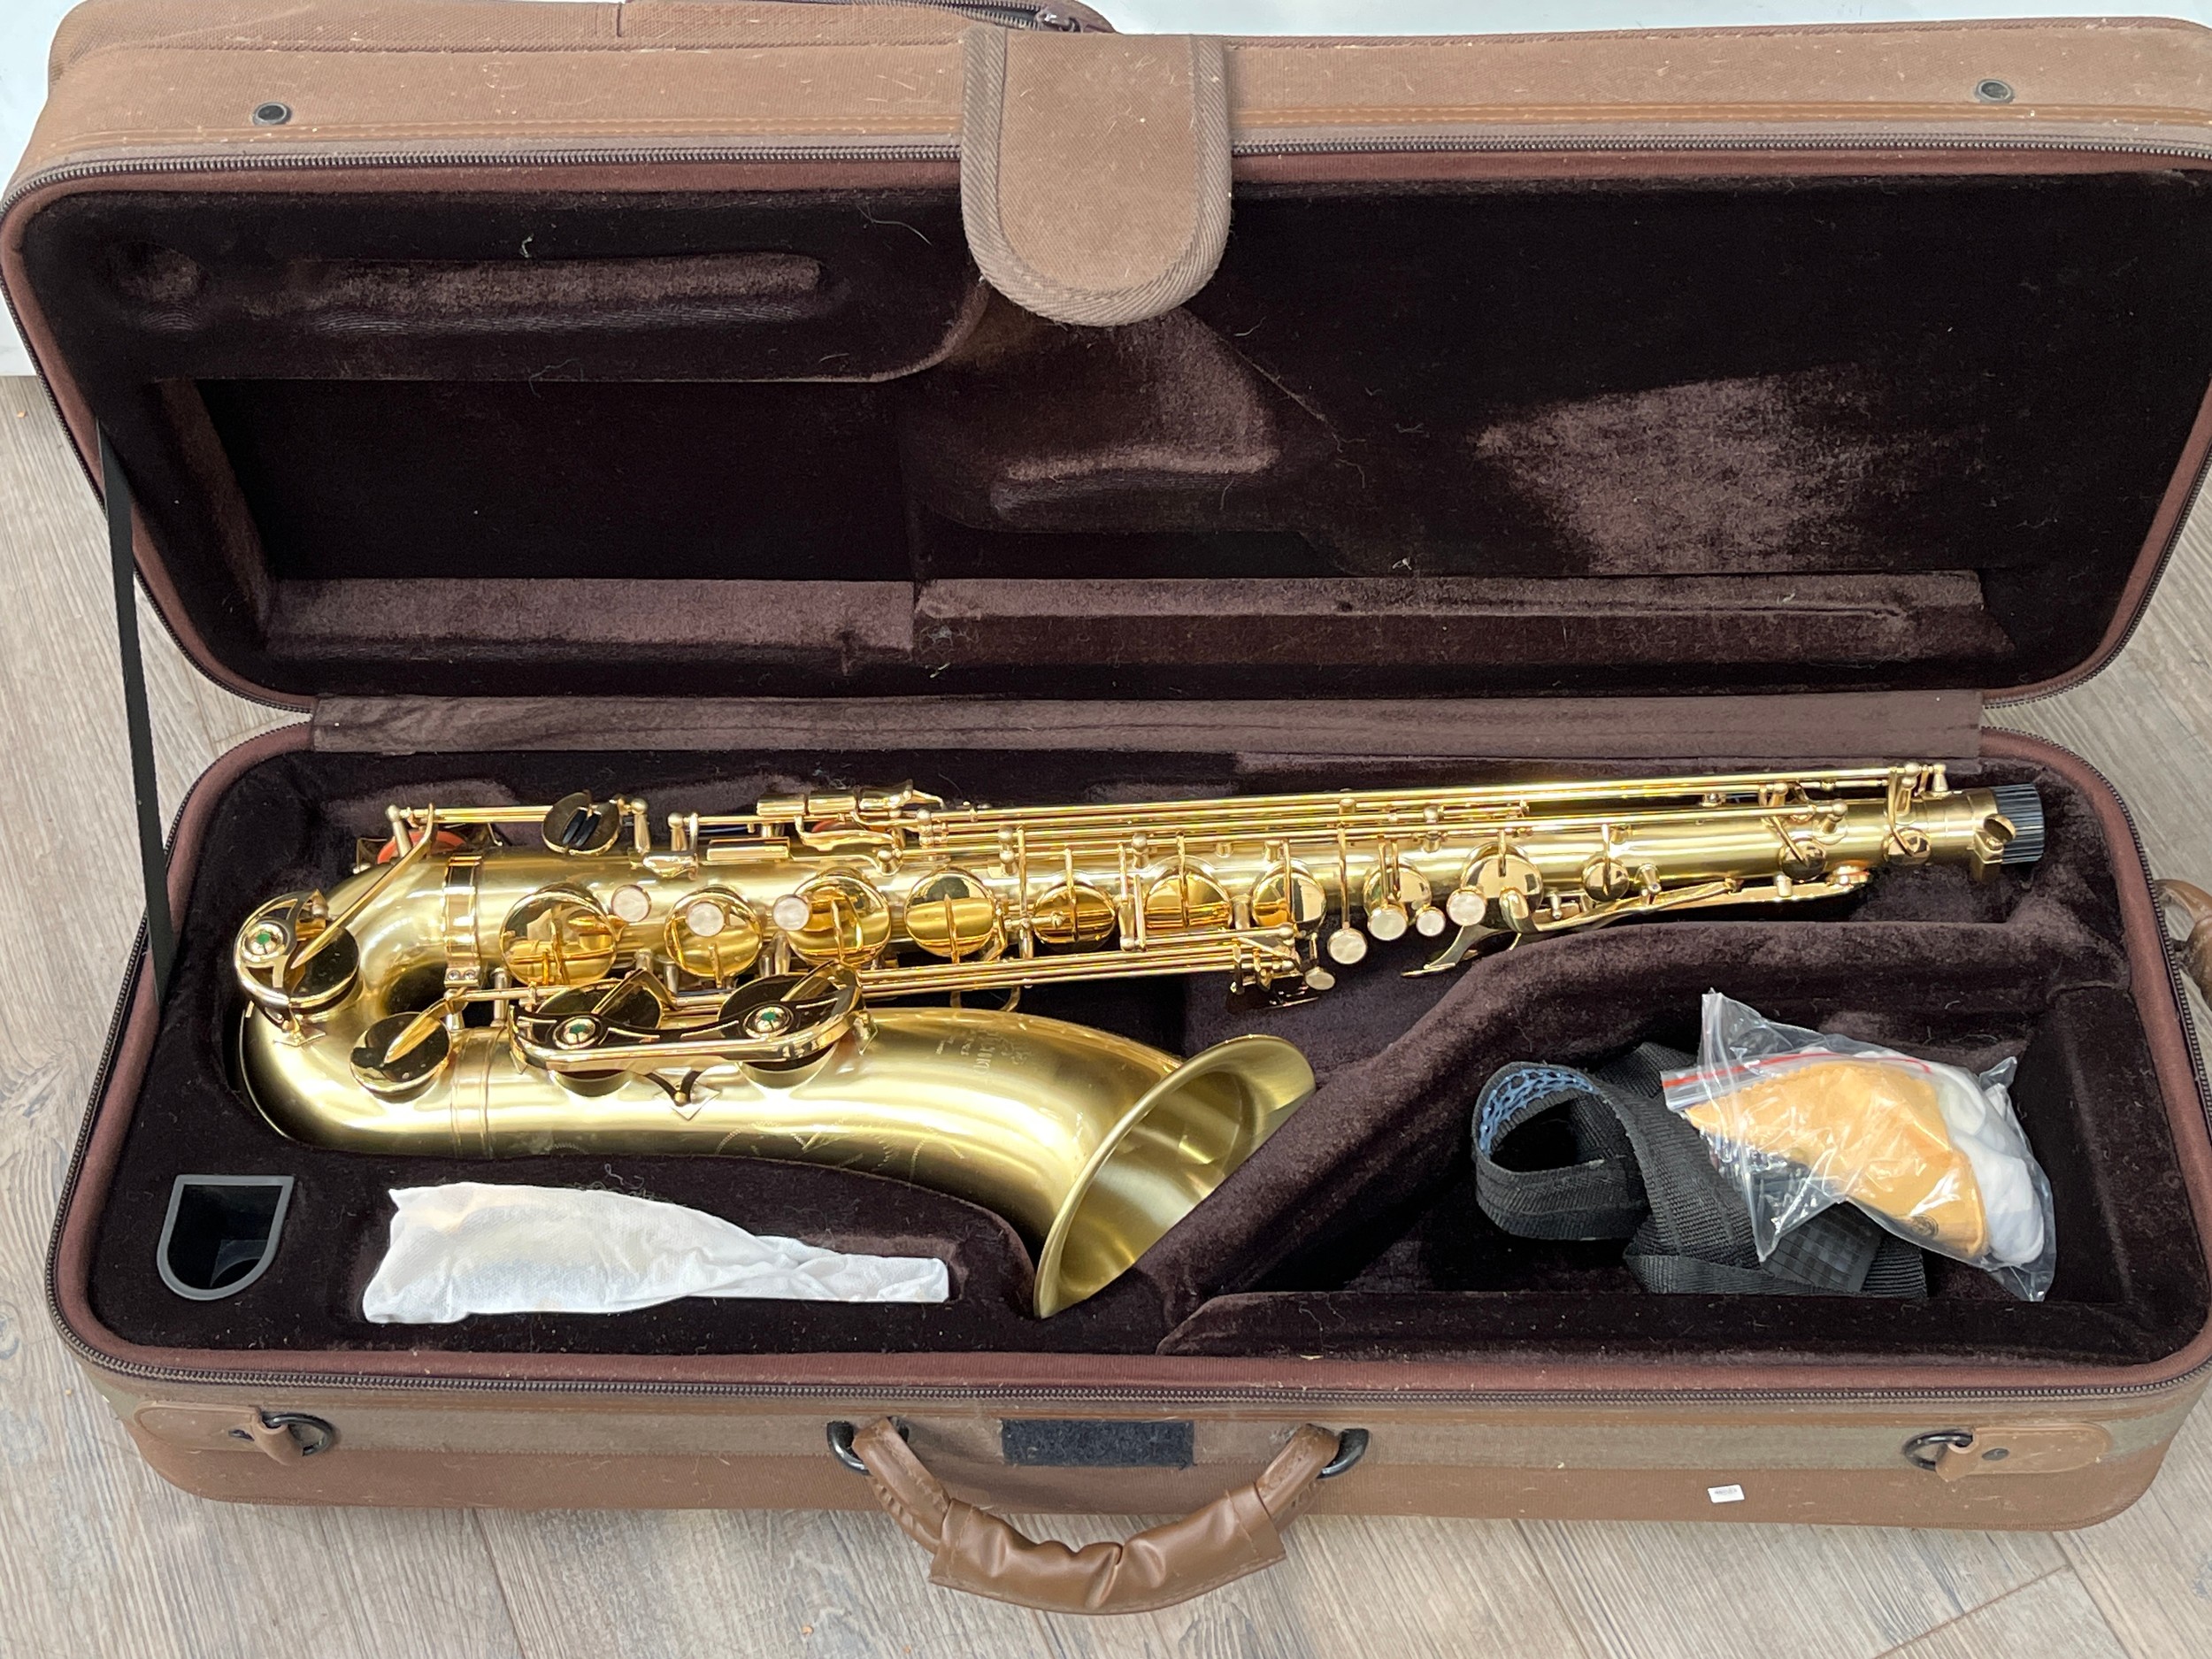 A Jericho tenor saxophone, brass, cased with accessories